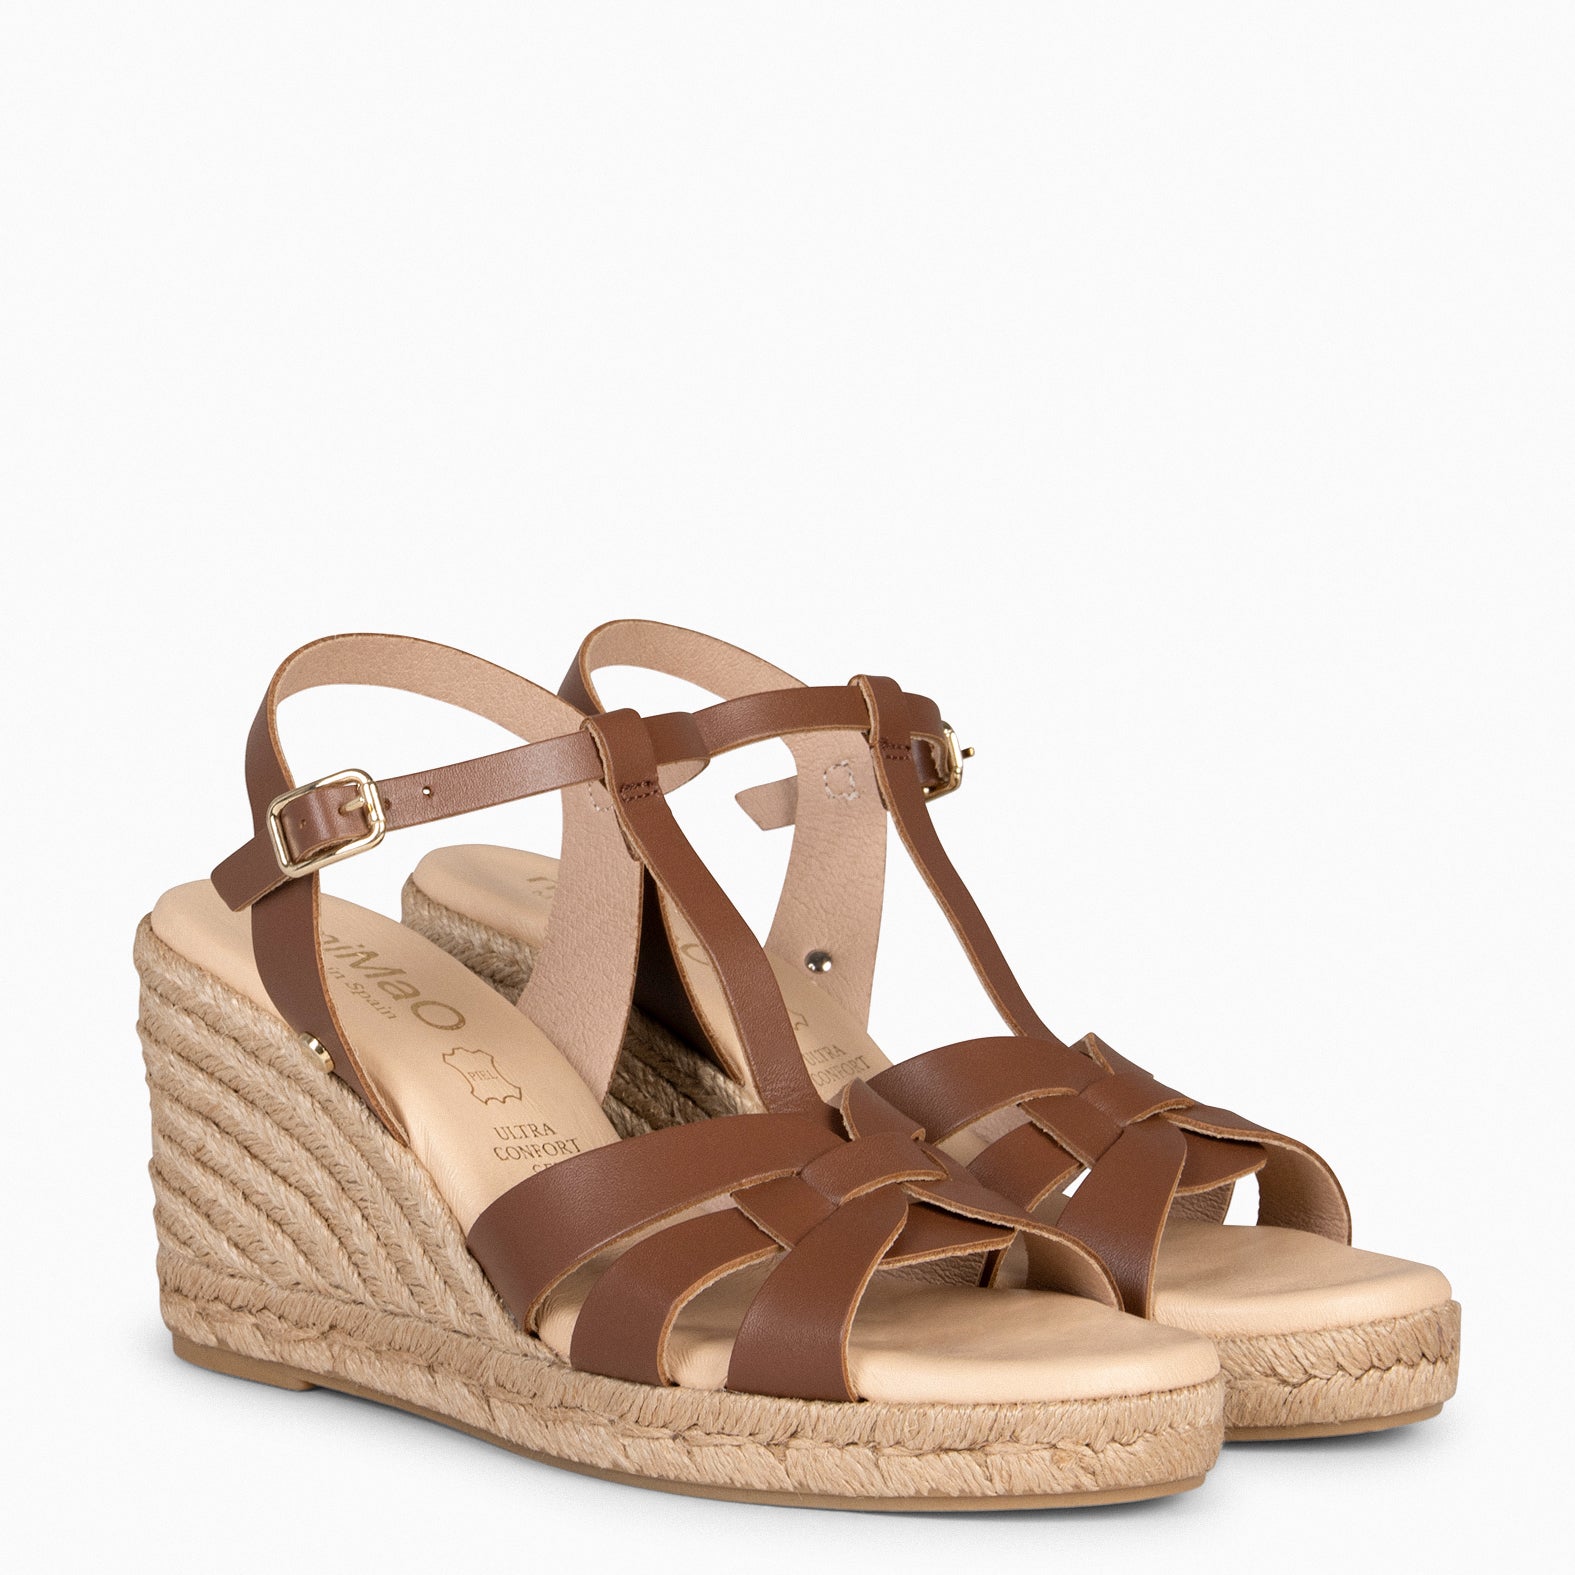 VALERIE – BROWN Espadrilles with Straps